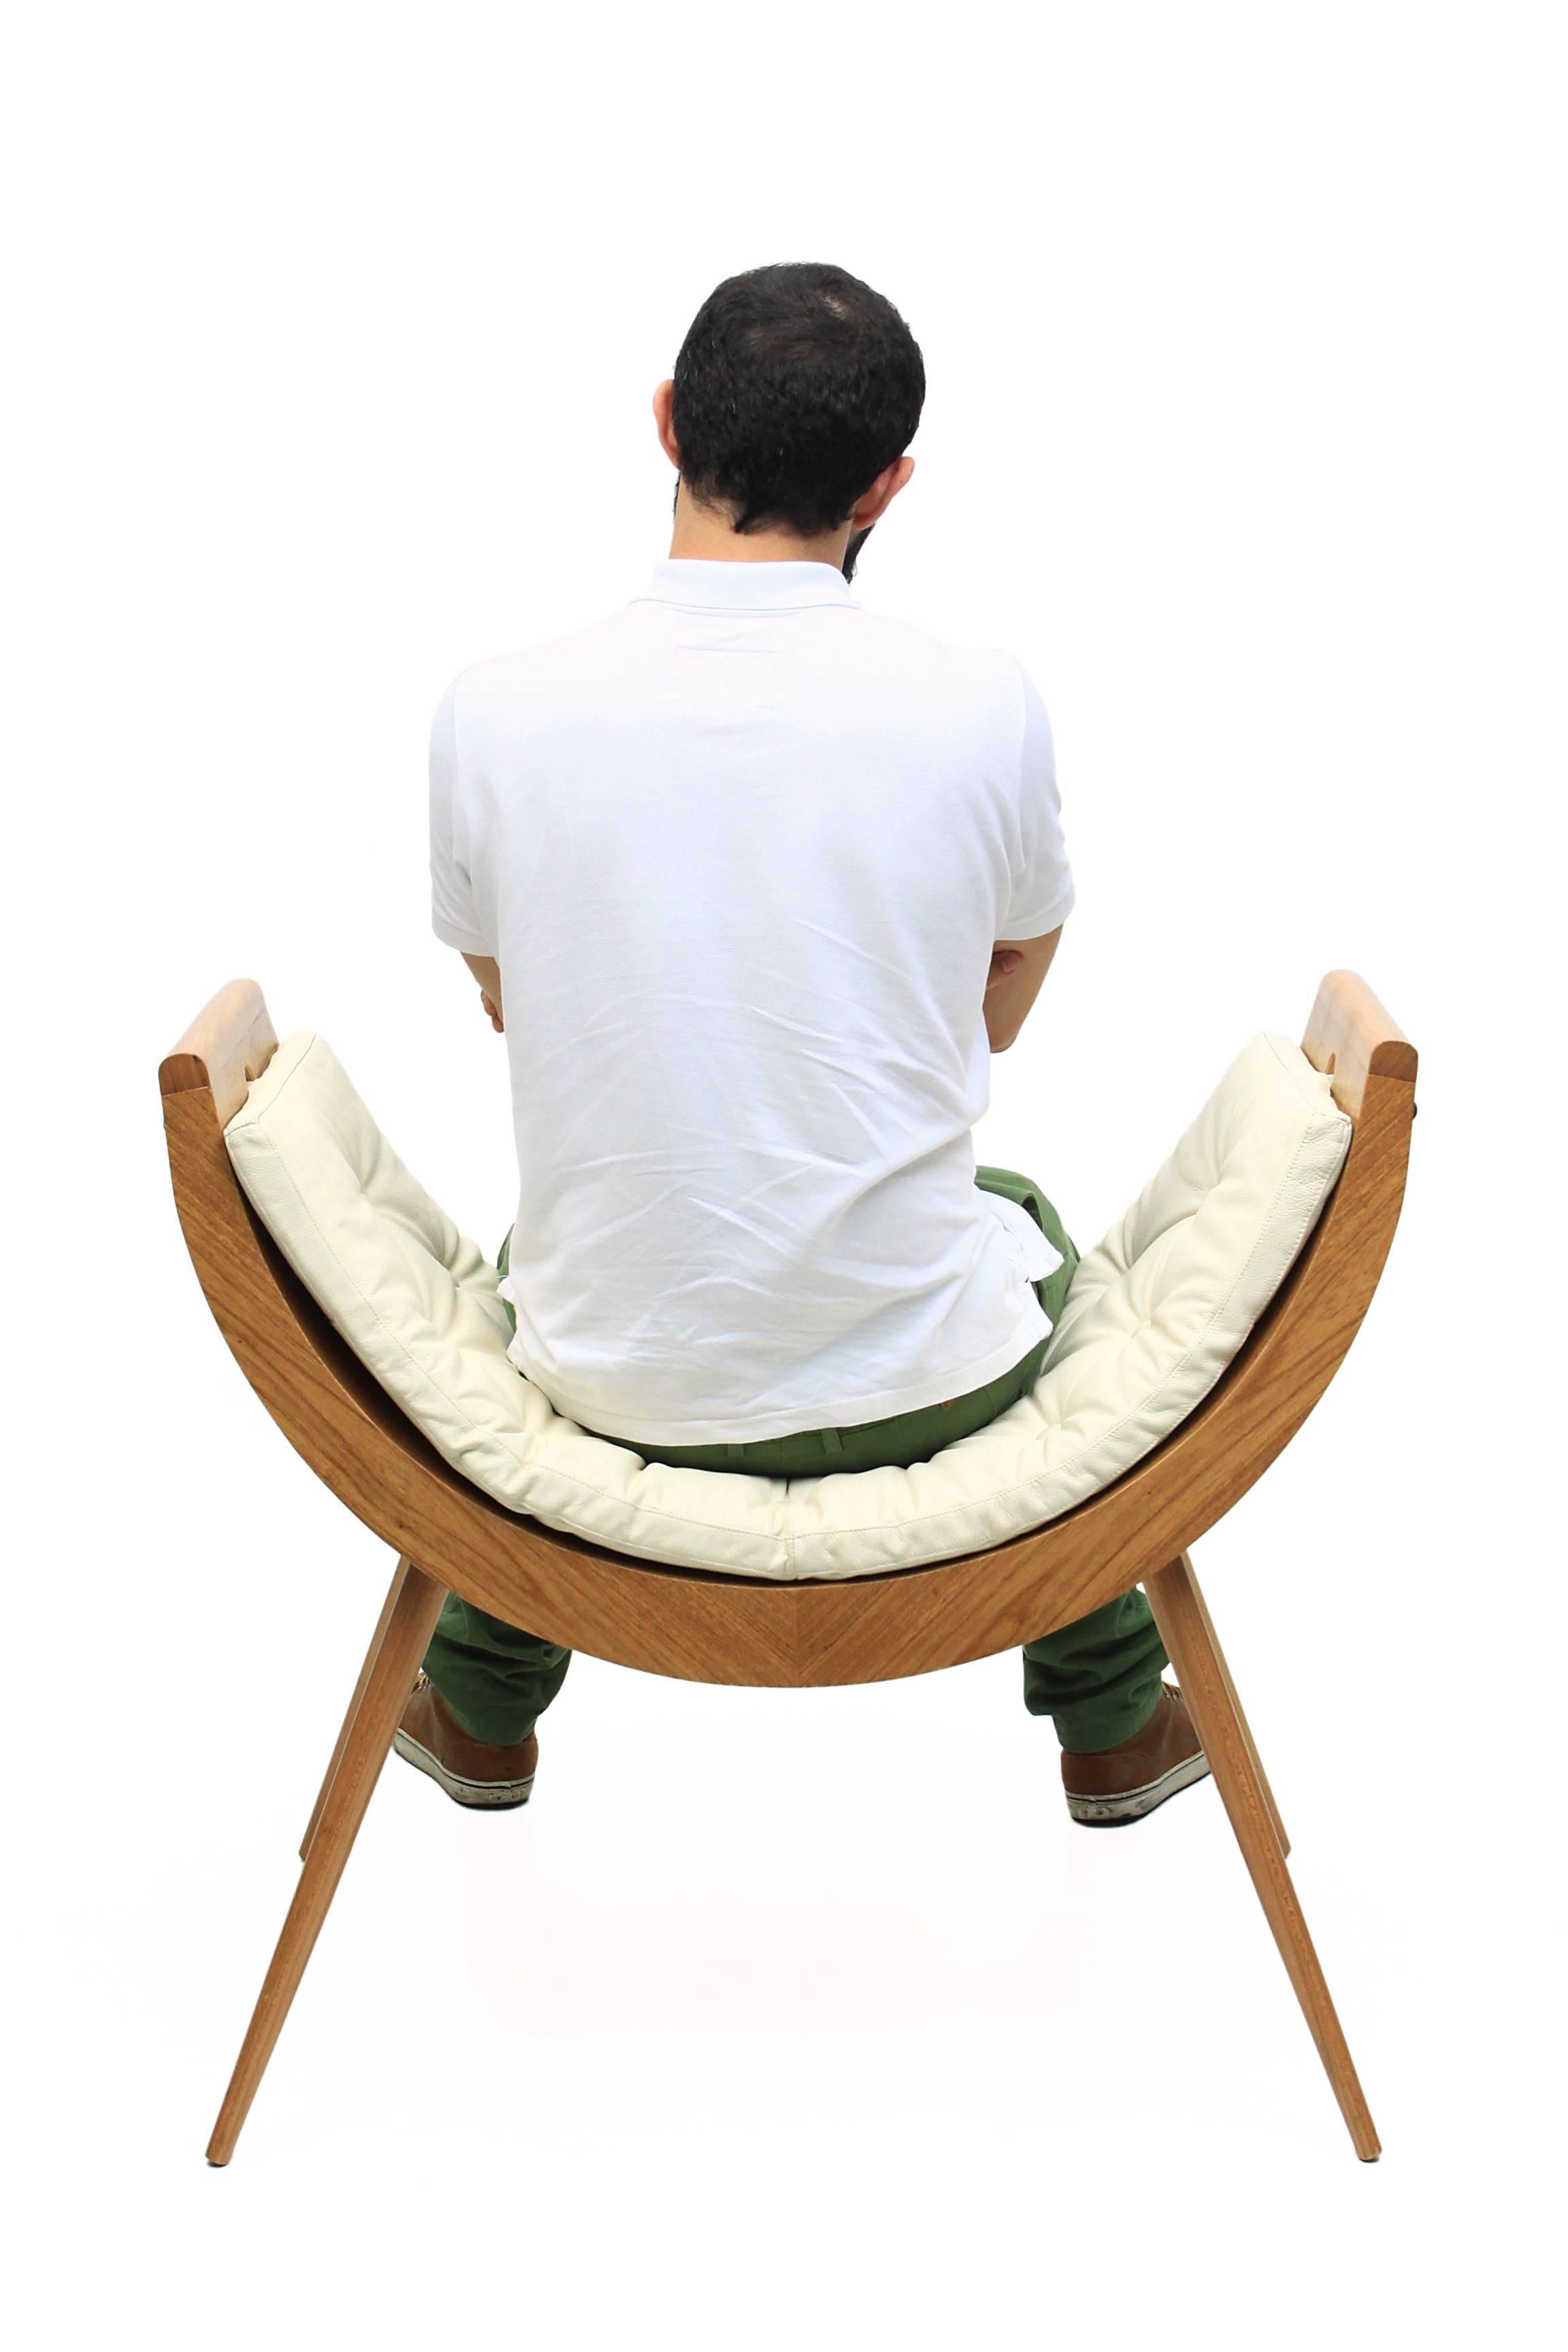 Contemporary Rita Baiana Armchair/Daybed in the Brazilian Modern Design Style in Freijó Wood